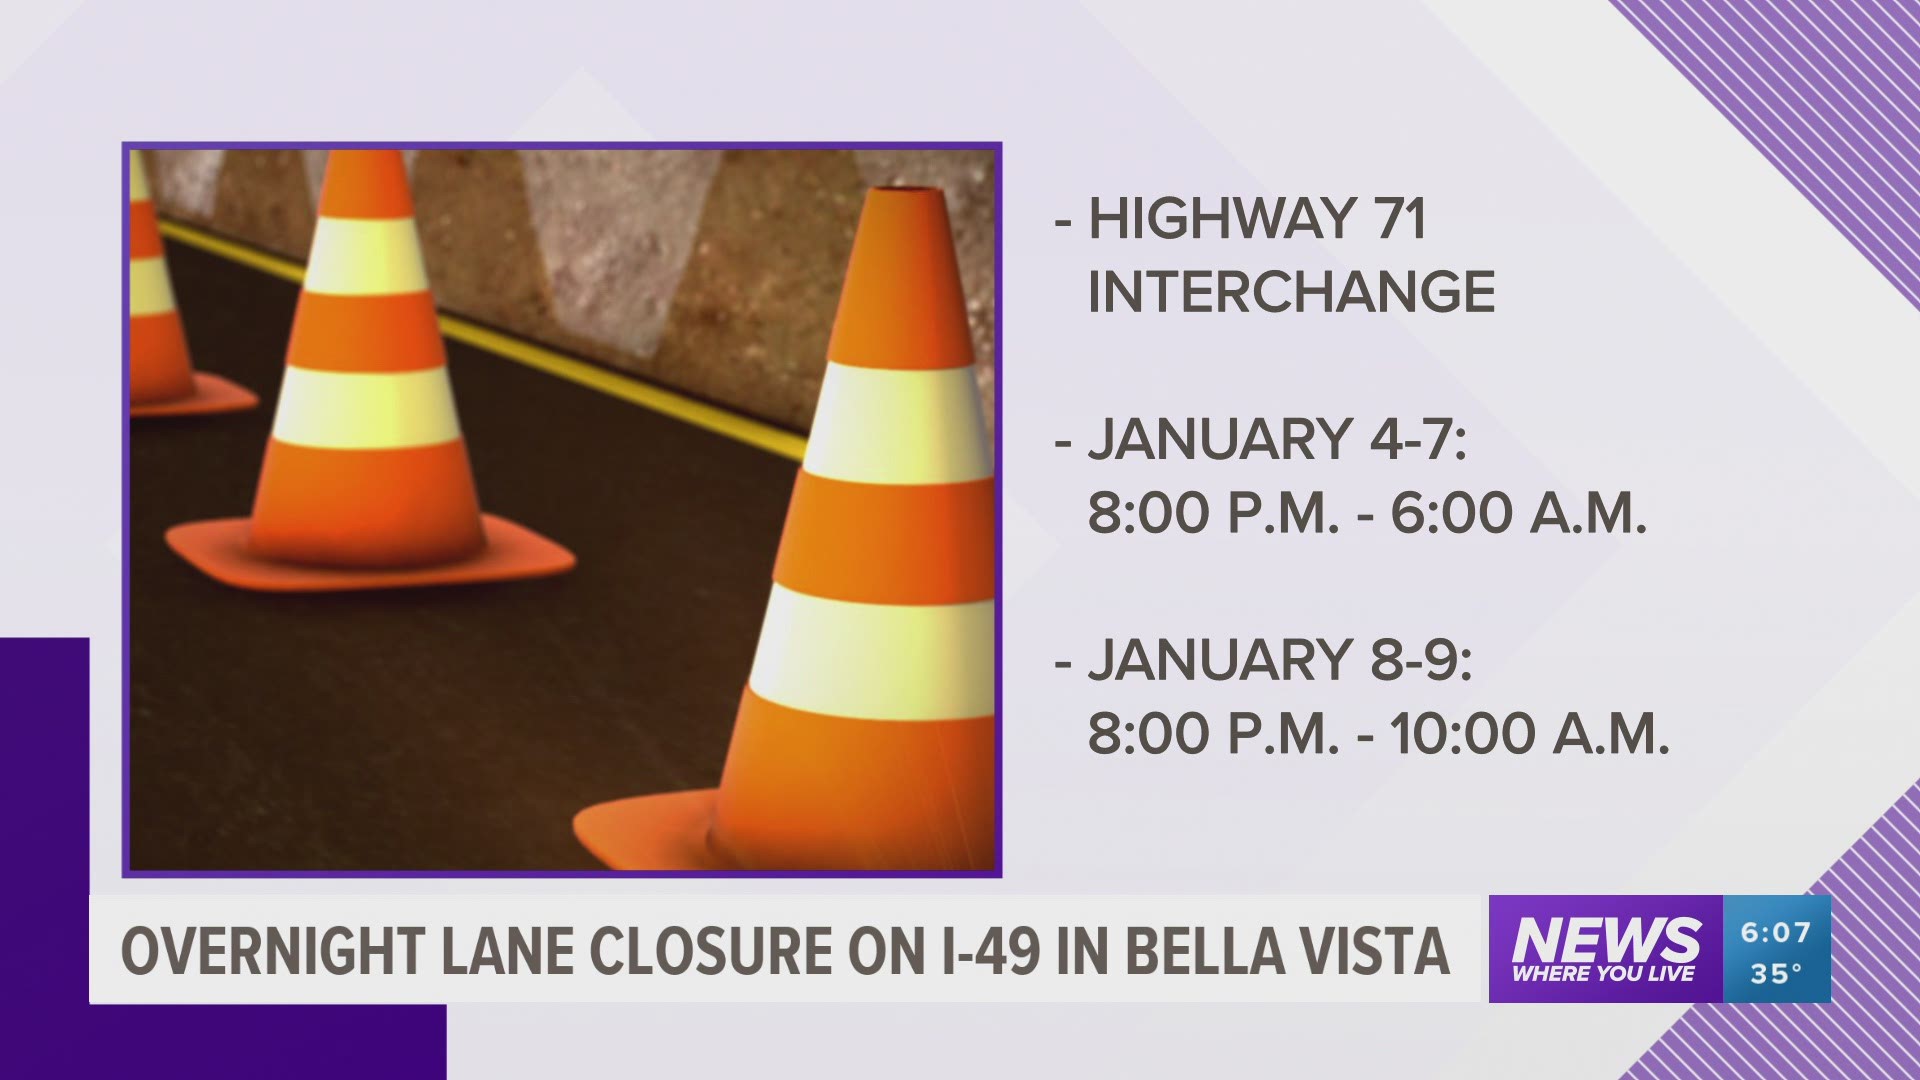 Starting Jan. 4, crews will close the southbound I-49 outside lane just south of the Bella Vista Bypass interchange.